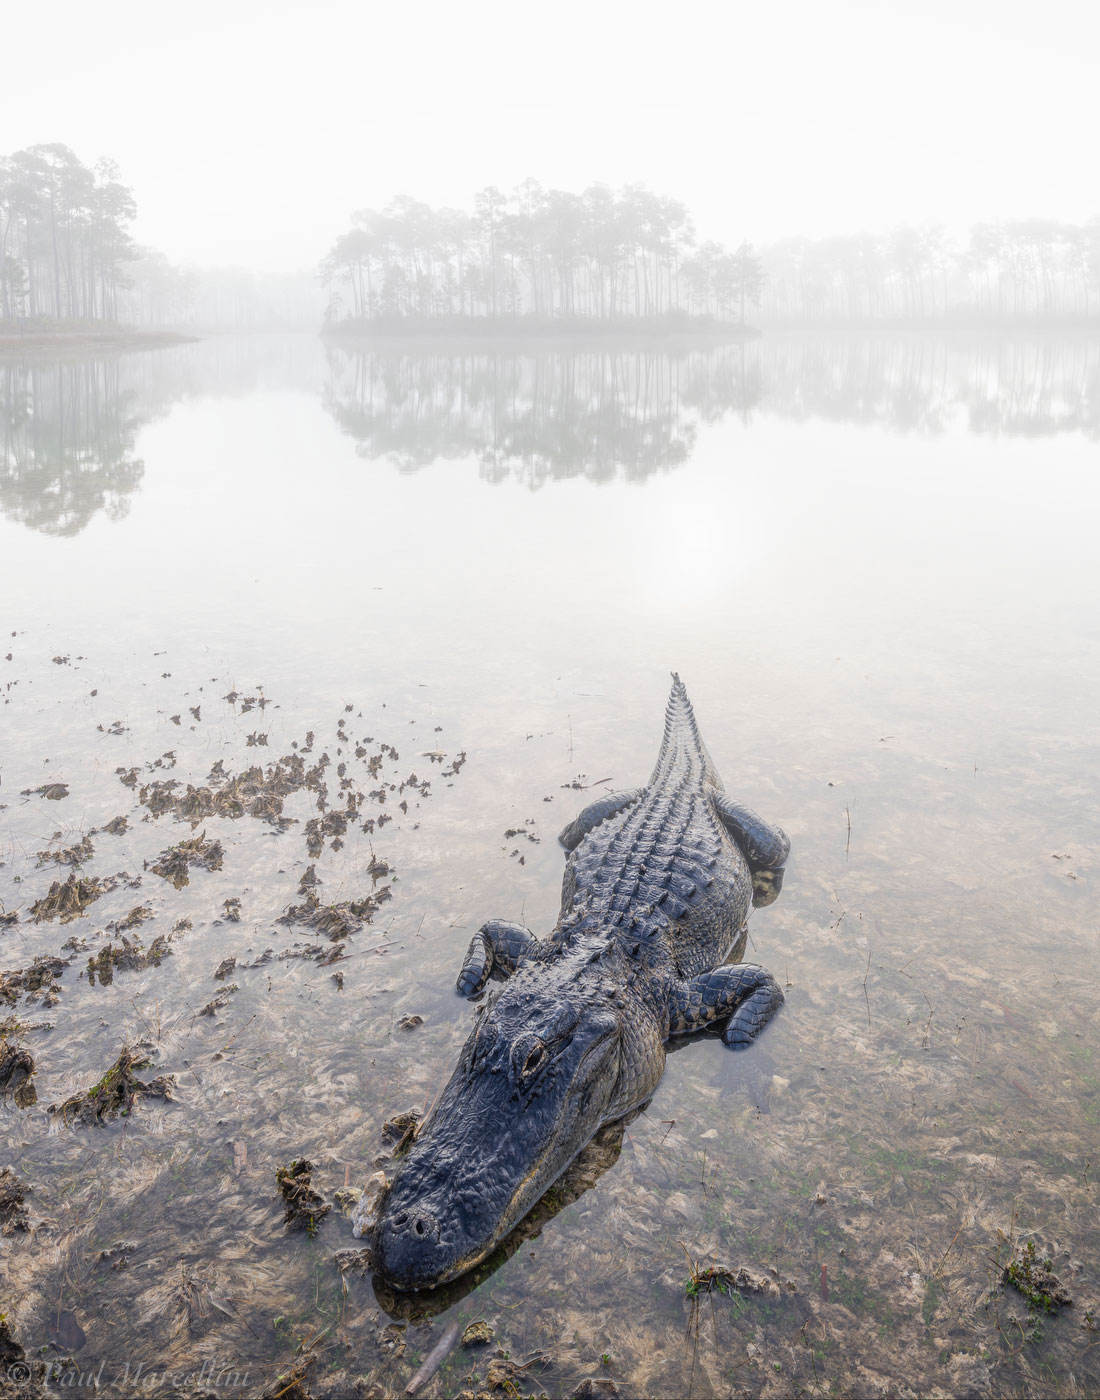 A "friendly" gator appraoches on a foggy morning in the Everglades.